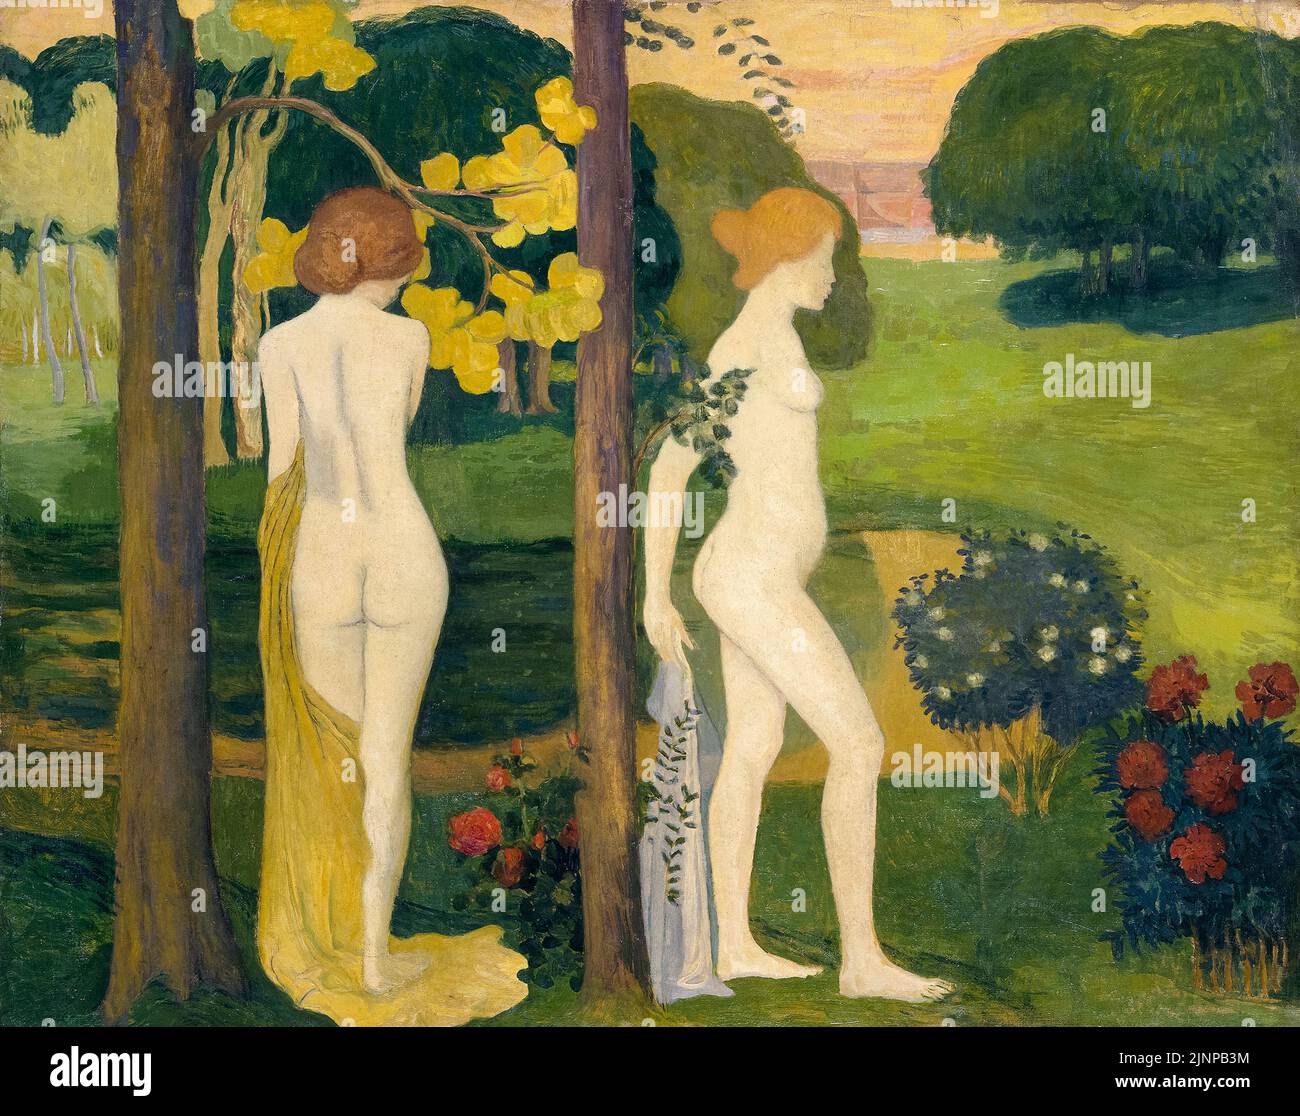 Aristide Maillol, Two Nudes in a Landscape, painting in oil on canvas, 1890-1900 Stock Photo